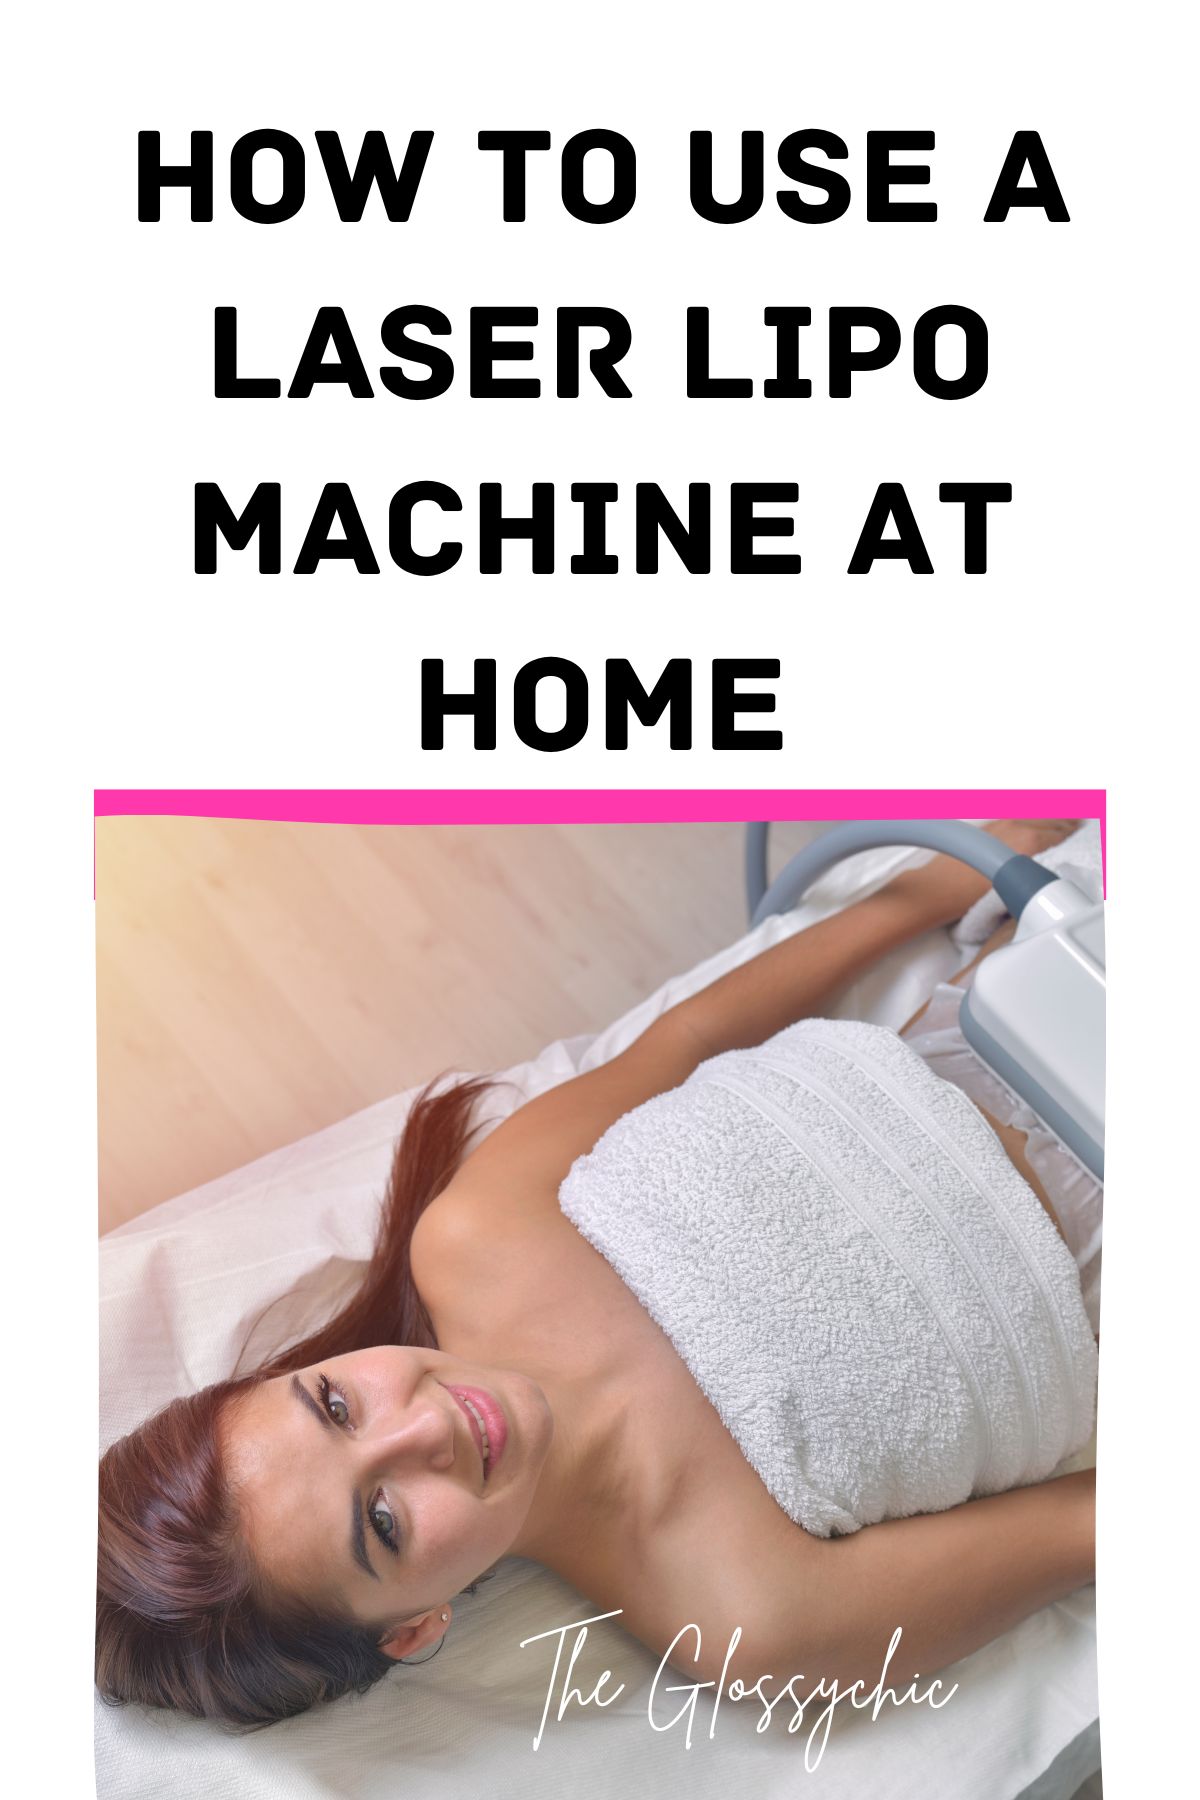 How To Use A Laser Lipo Machine At Home: Tips For Looking Gorgeous